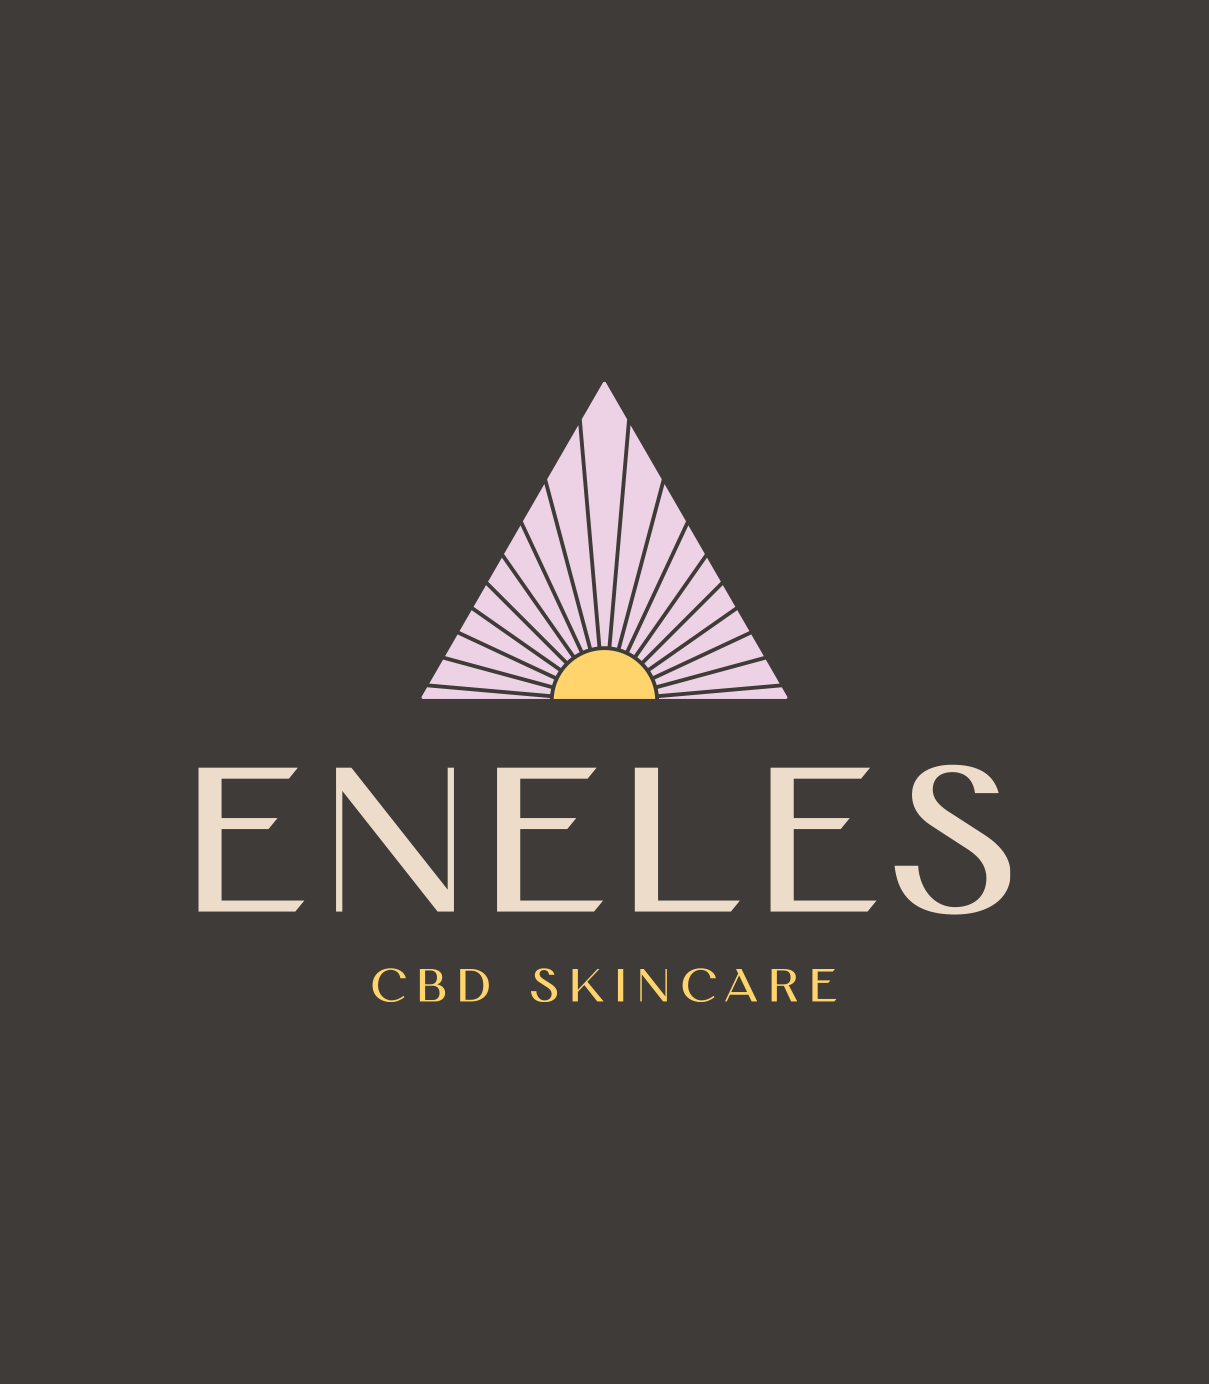 CBD Skincare brand, Eneles, main logo in tan, yellow, and lavender on a charcoal background